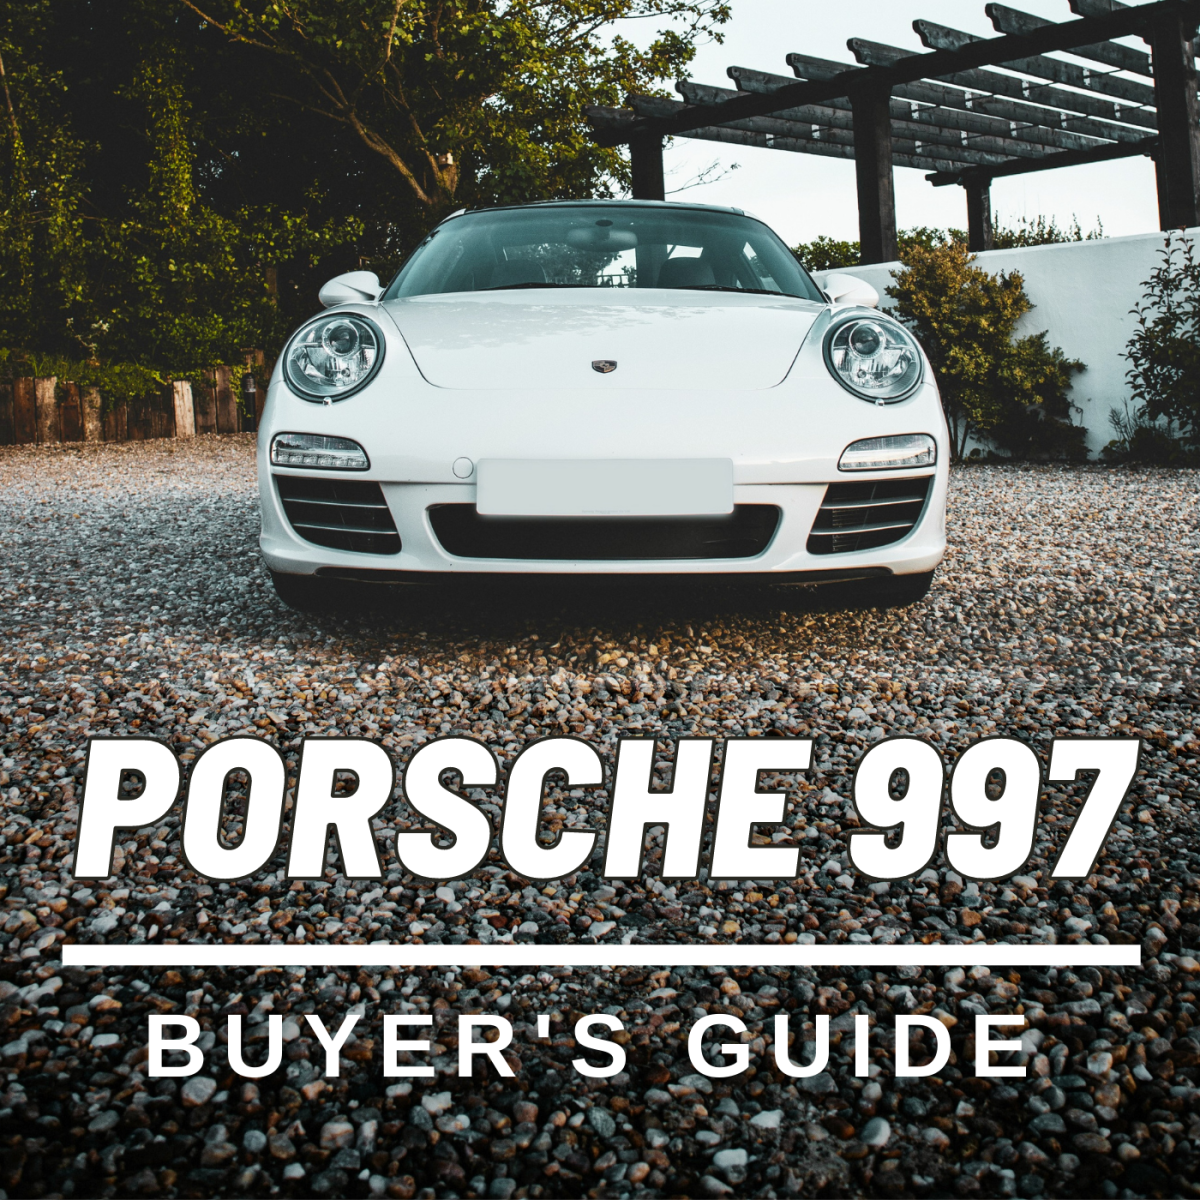 Everything you need to know about buying a Porsche 997